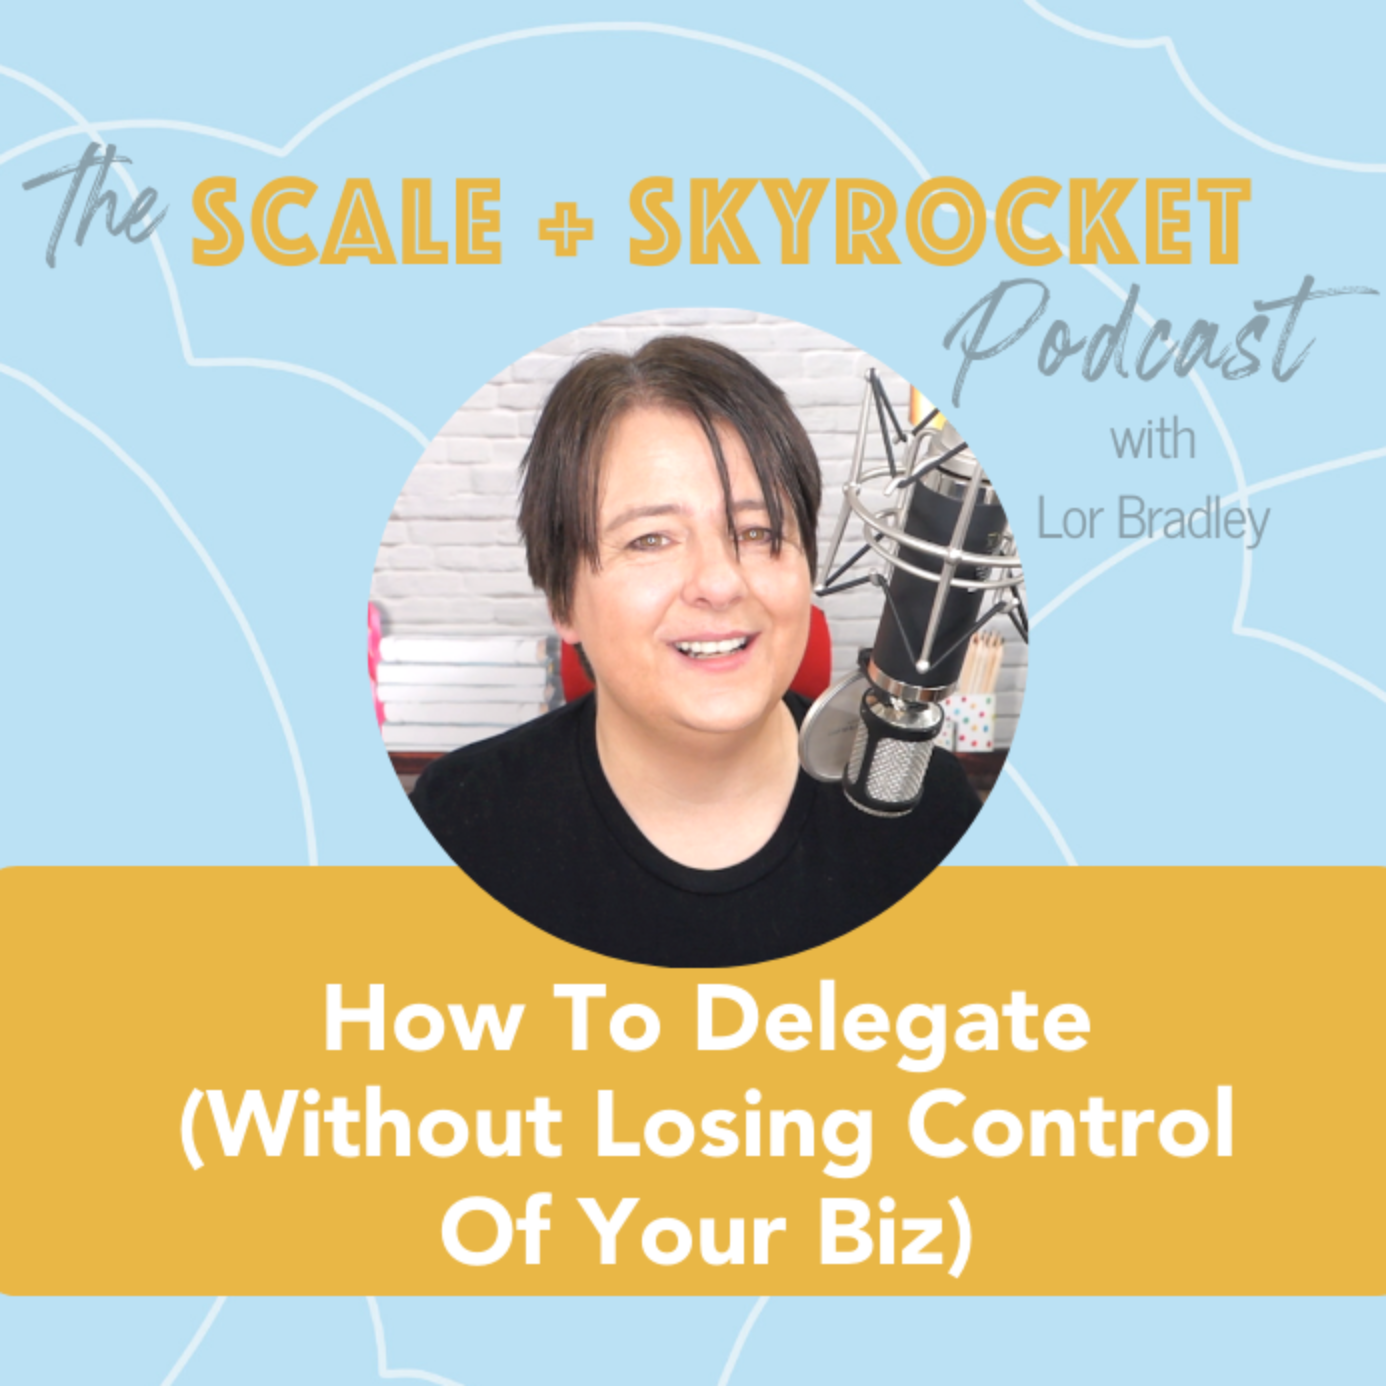 How To Delegate (Without Losing Control Of Your Biz!)